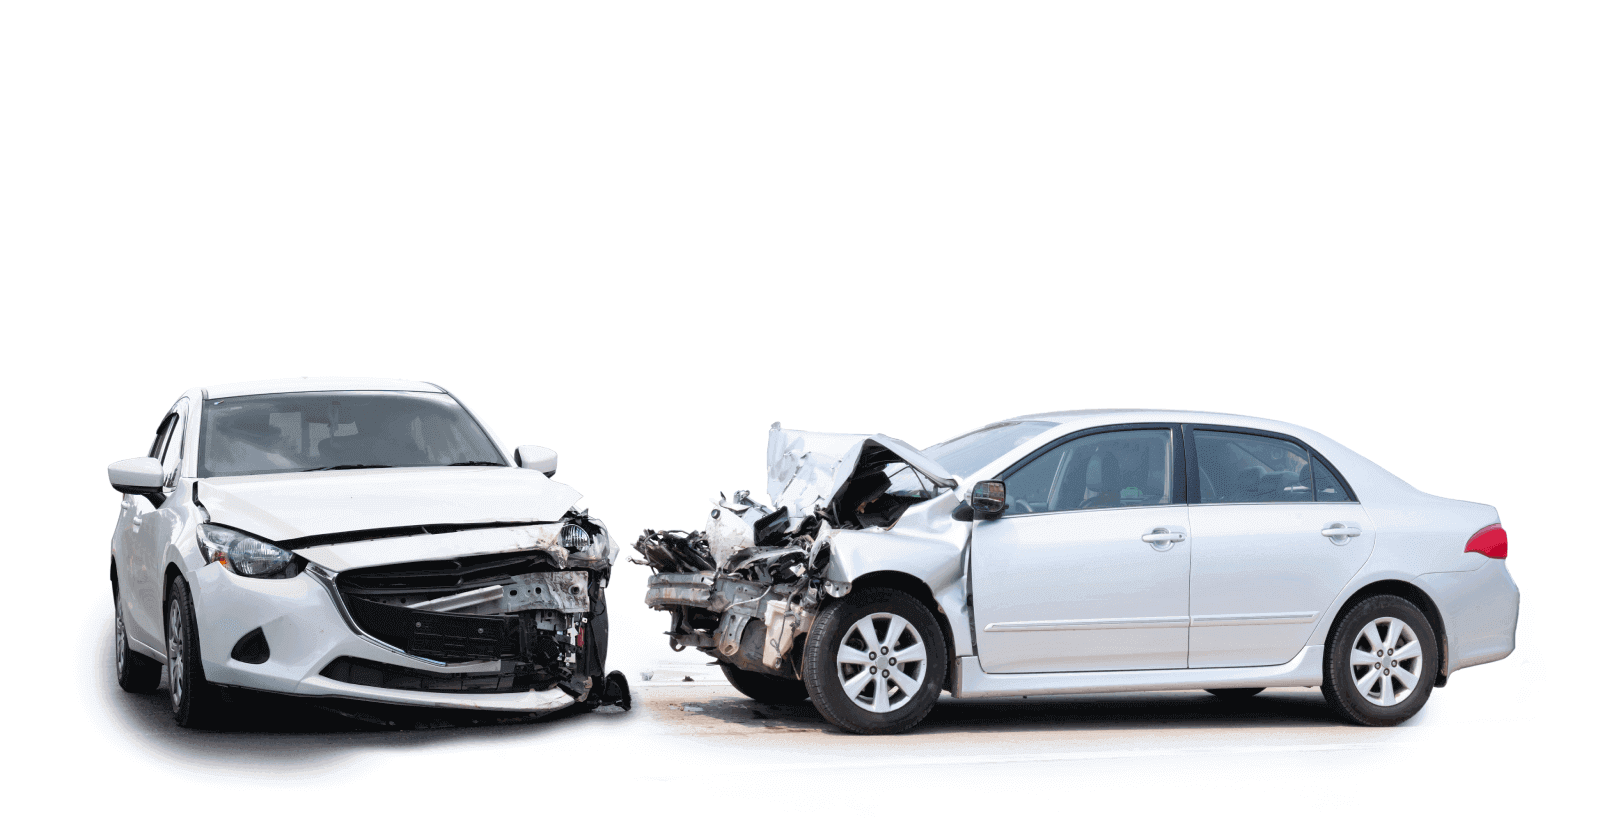 Car Insurance Claim Process in Delhi: What to Do After an Accident?